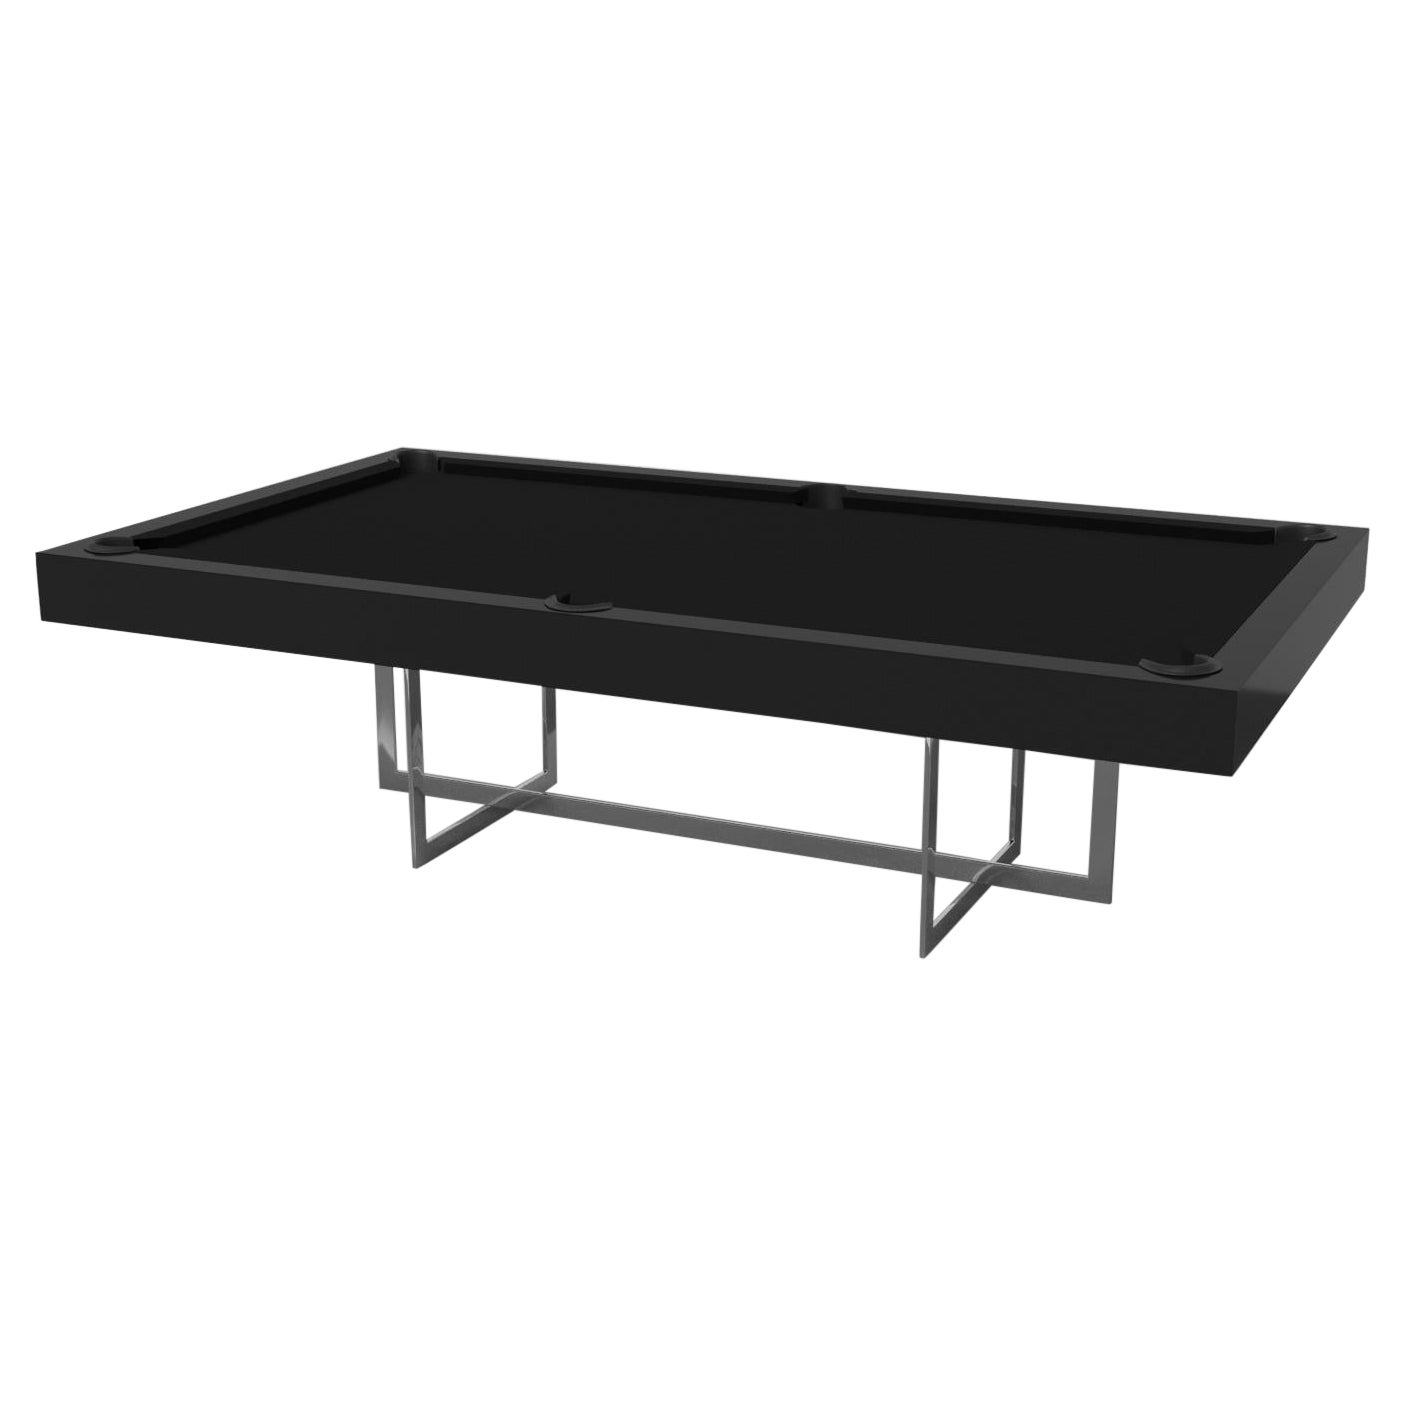 Elevate Customs Beso Pool Table / Solid Pantone Black Color in 8.5' -Made in USA For Sale